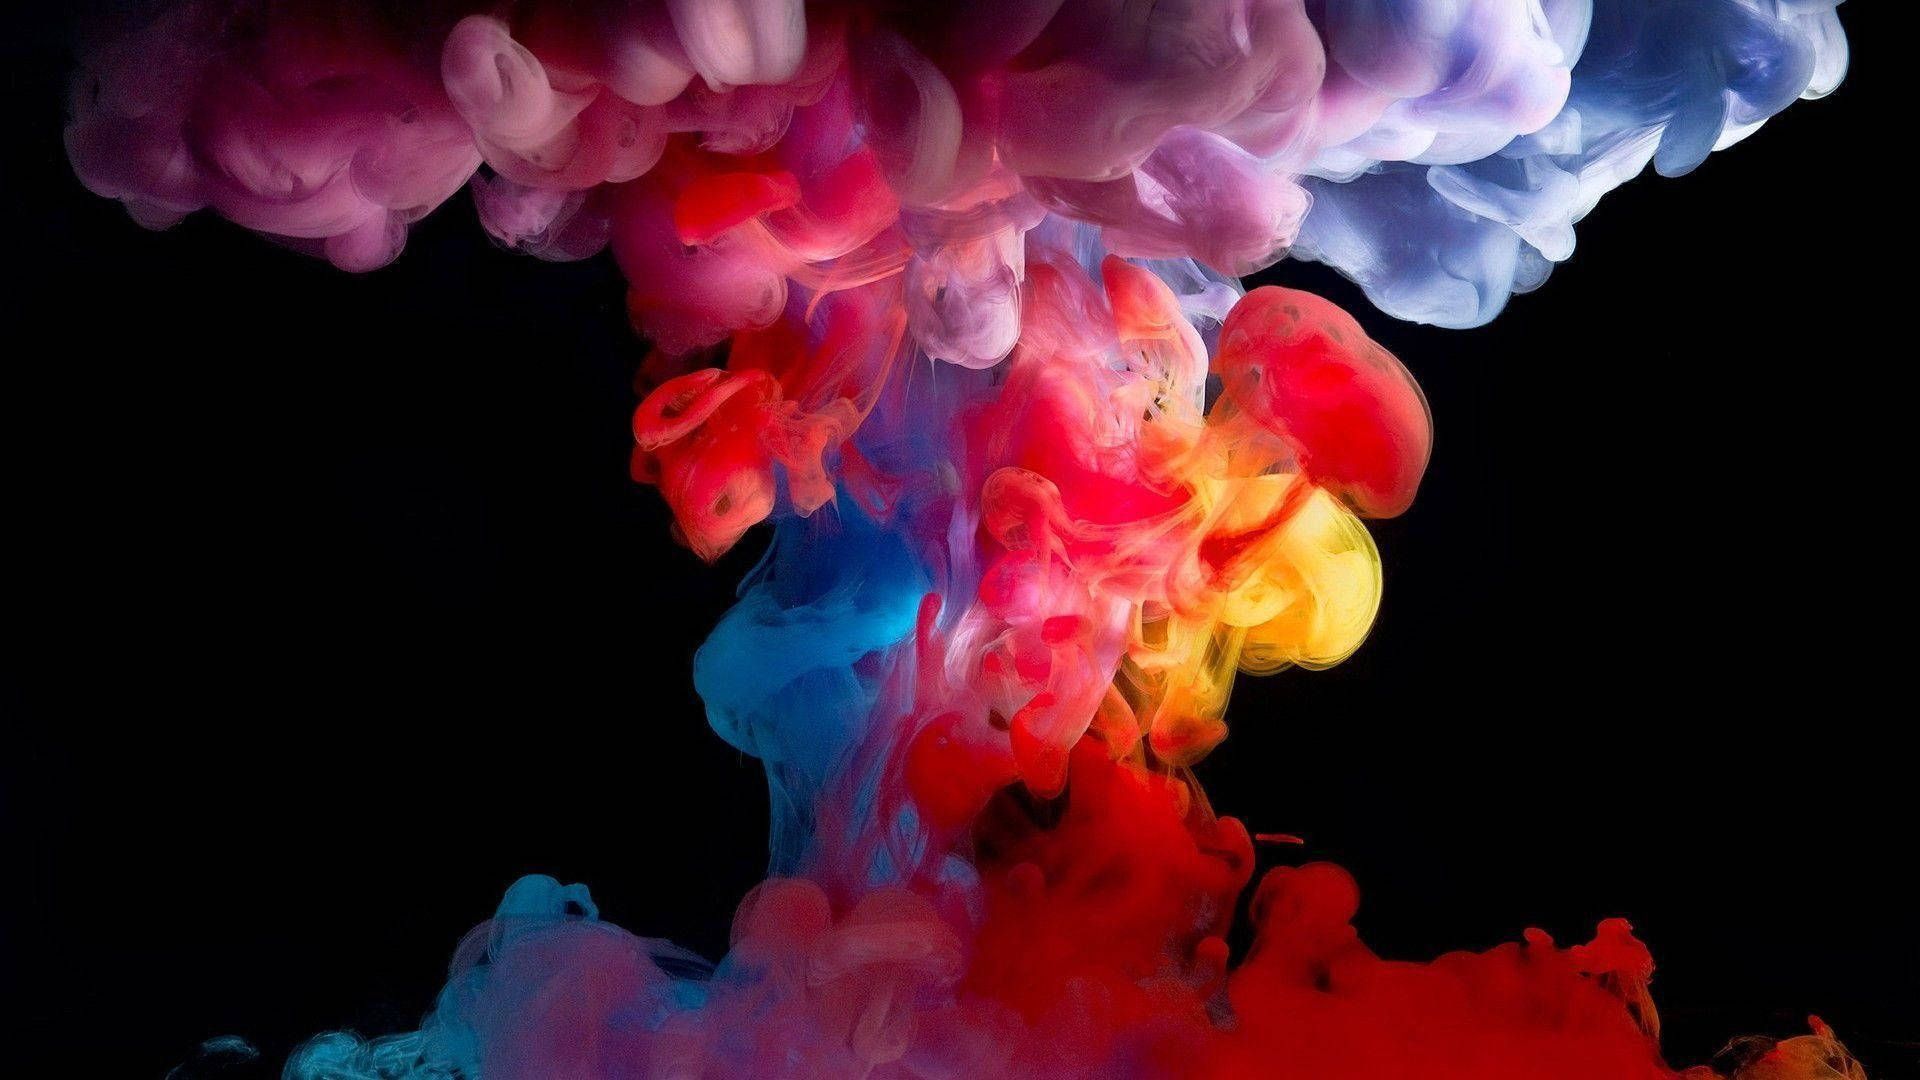 A colorful explosion in the dark - Smoke